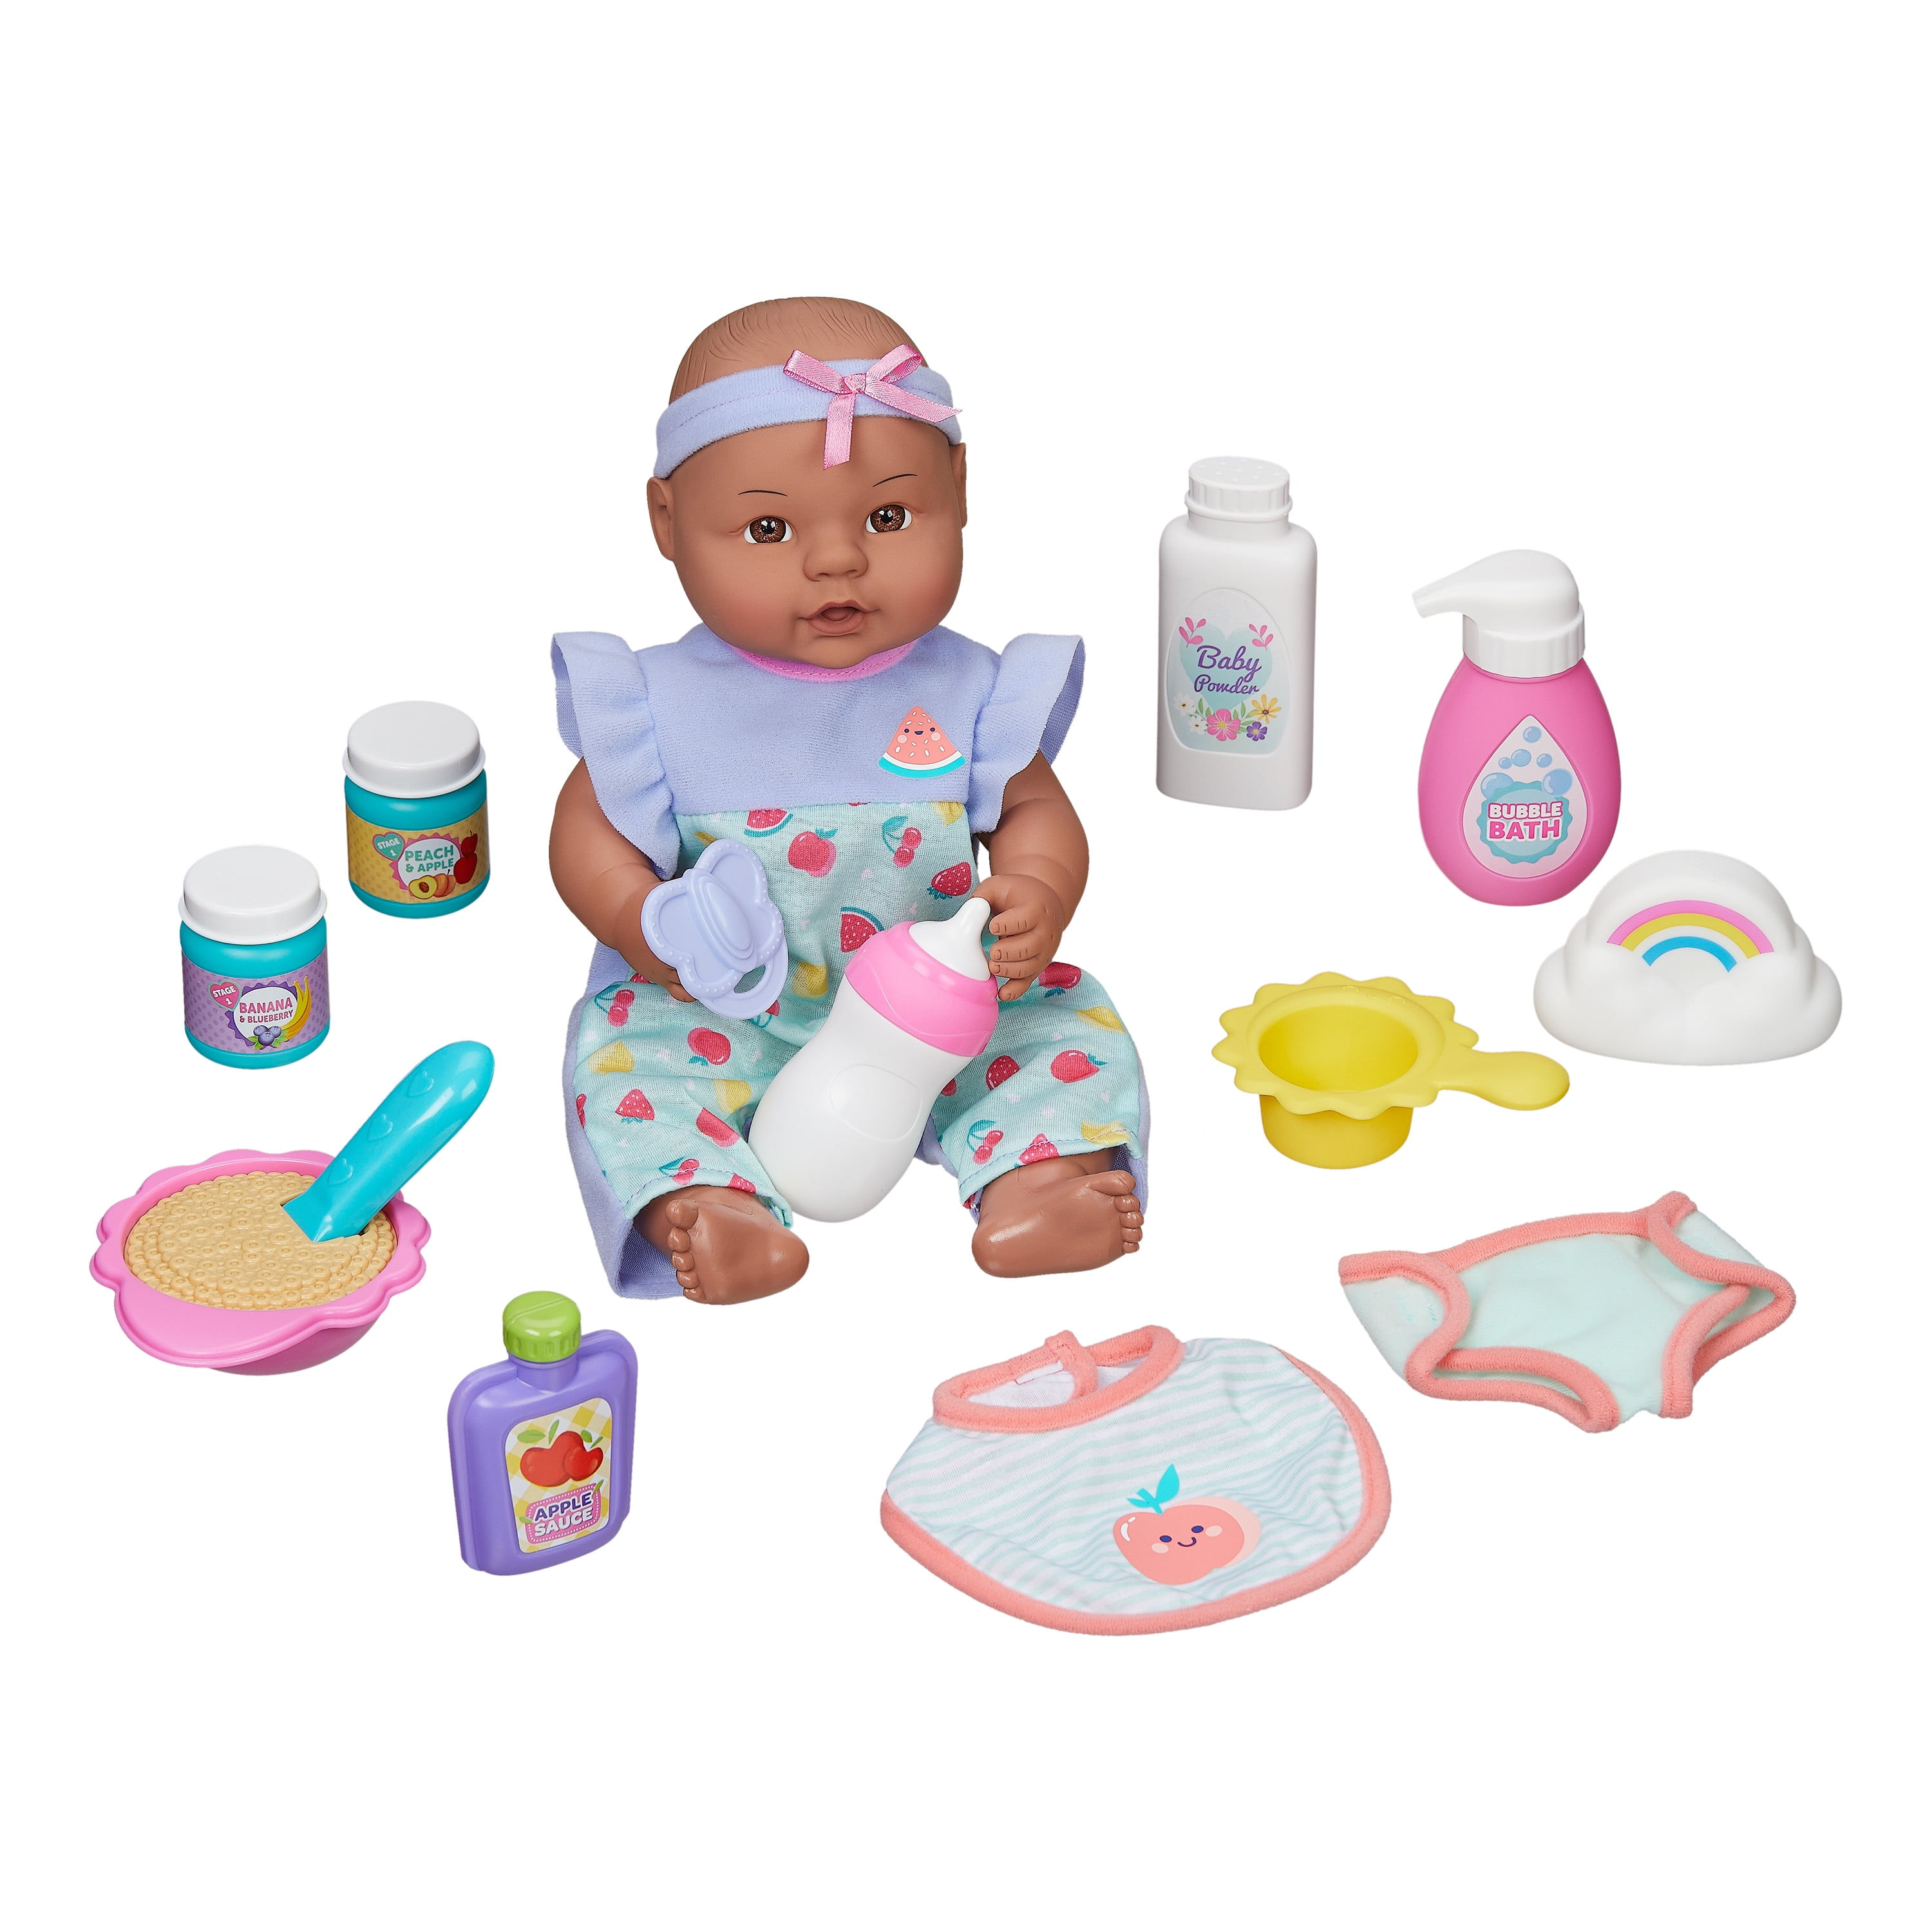 My Sweet Love 12.5" Play with Me Play Set, 16 Pieces Included, Dark Skin Tone